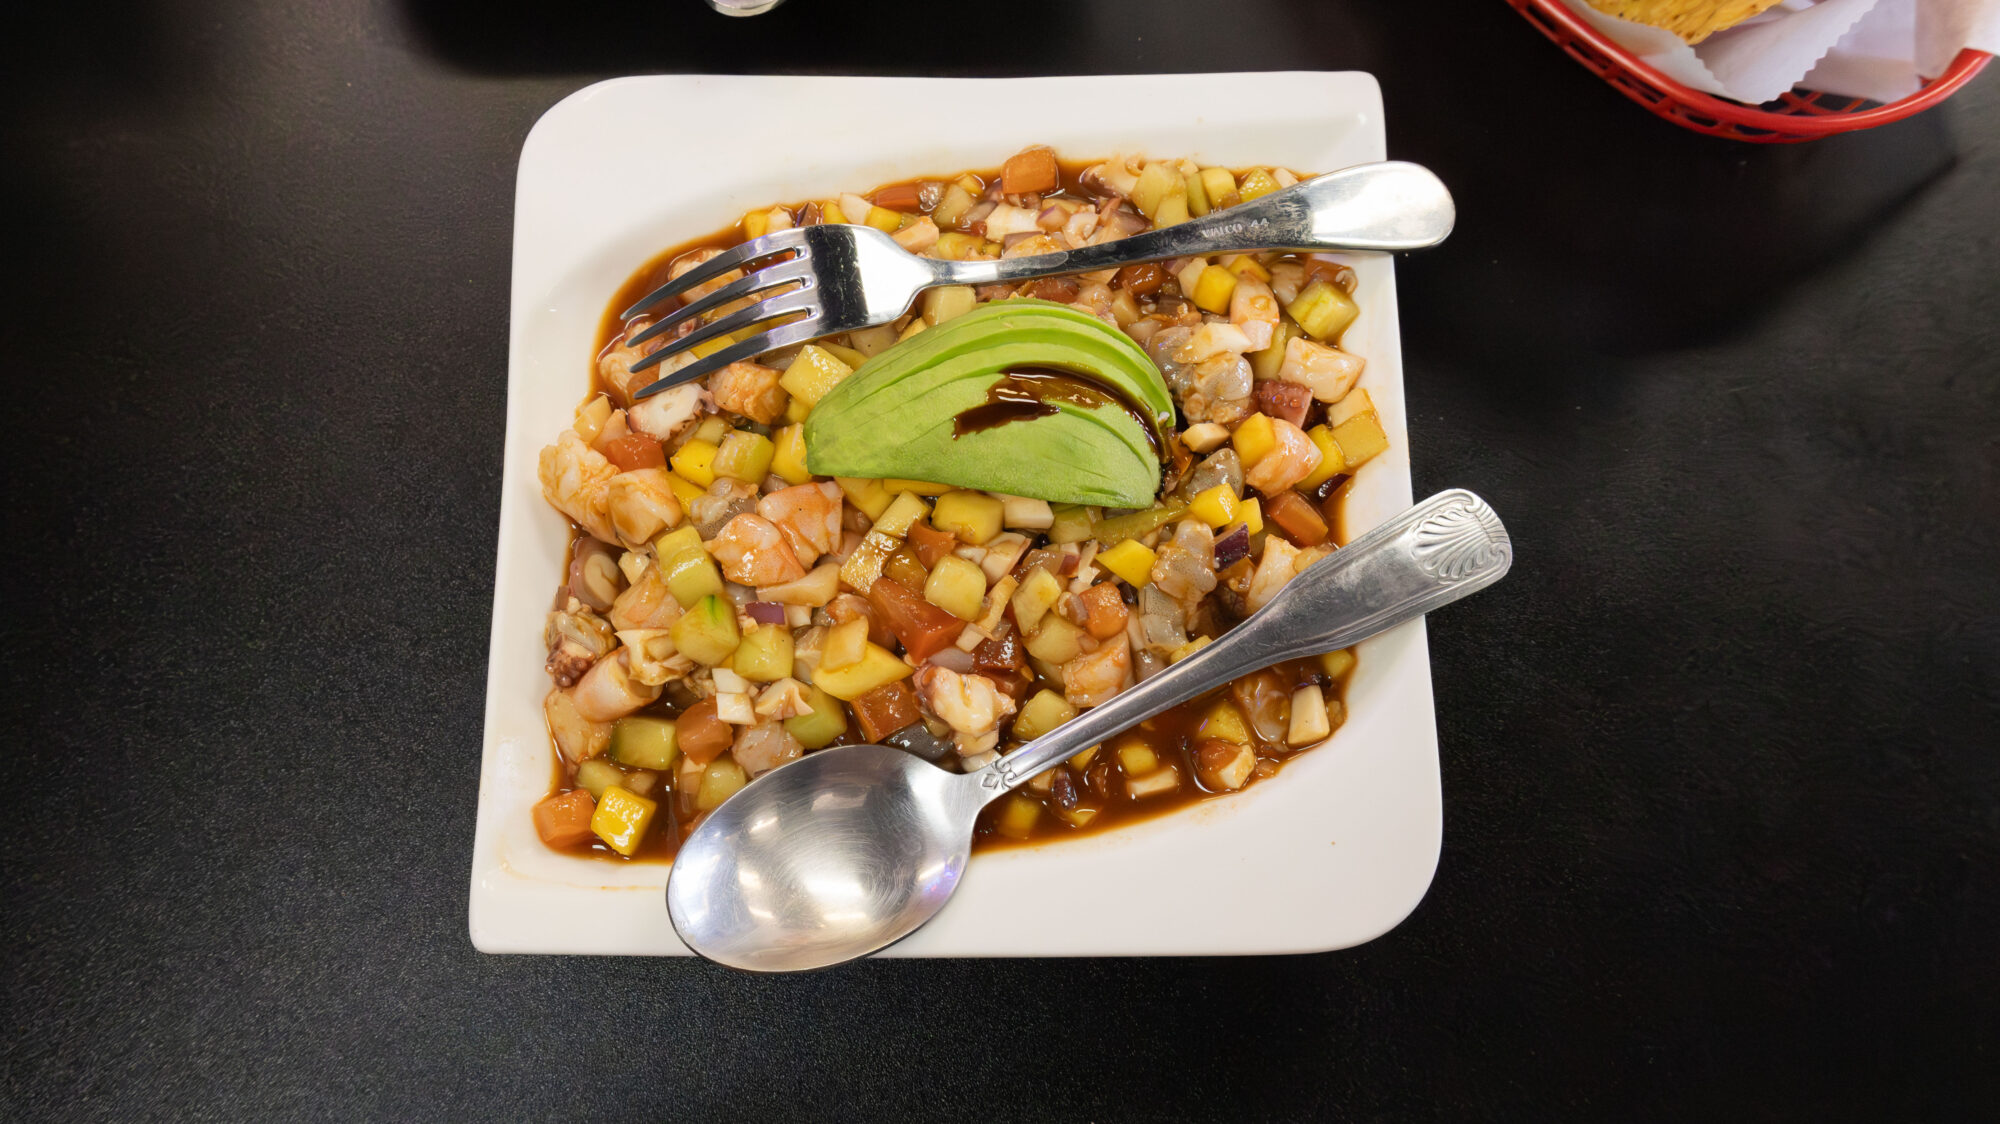 A plate of ceviche